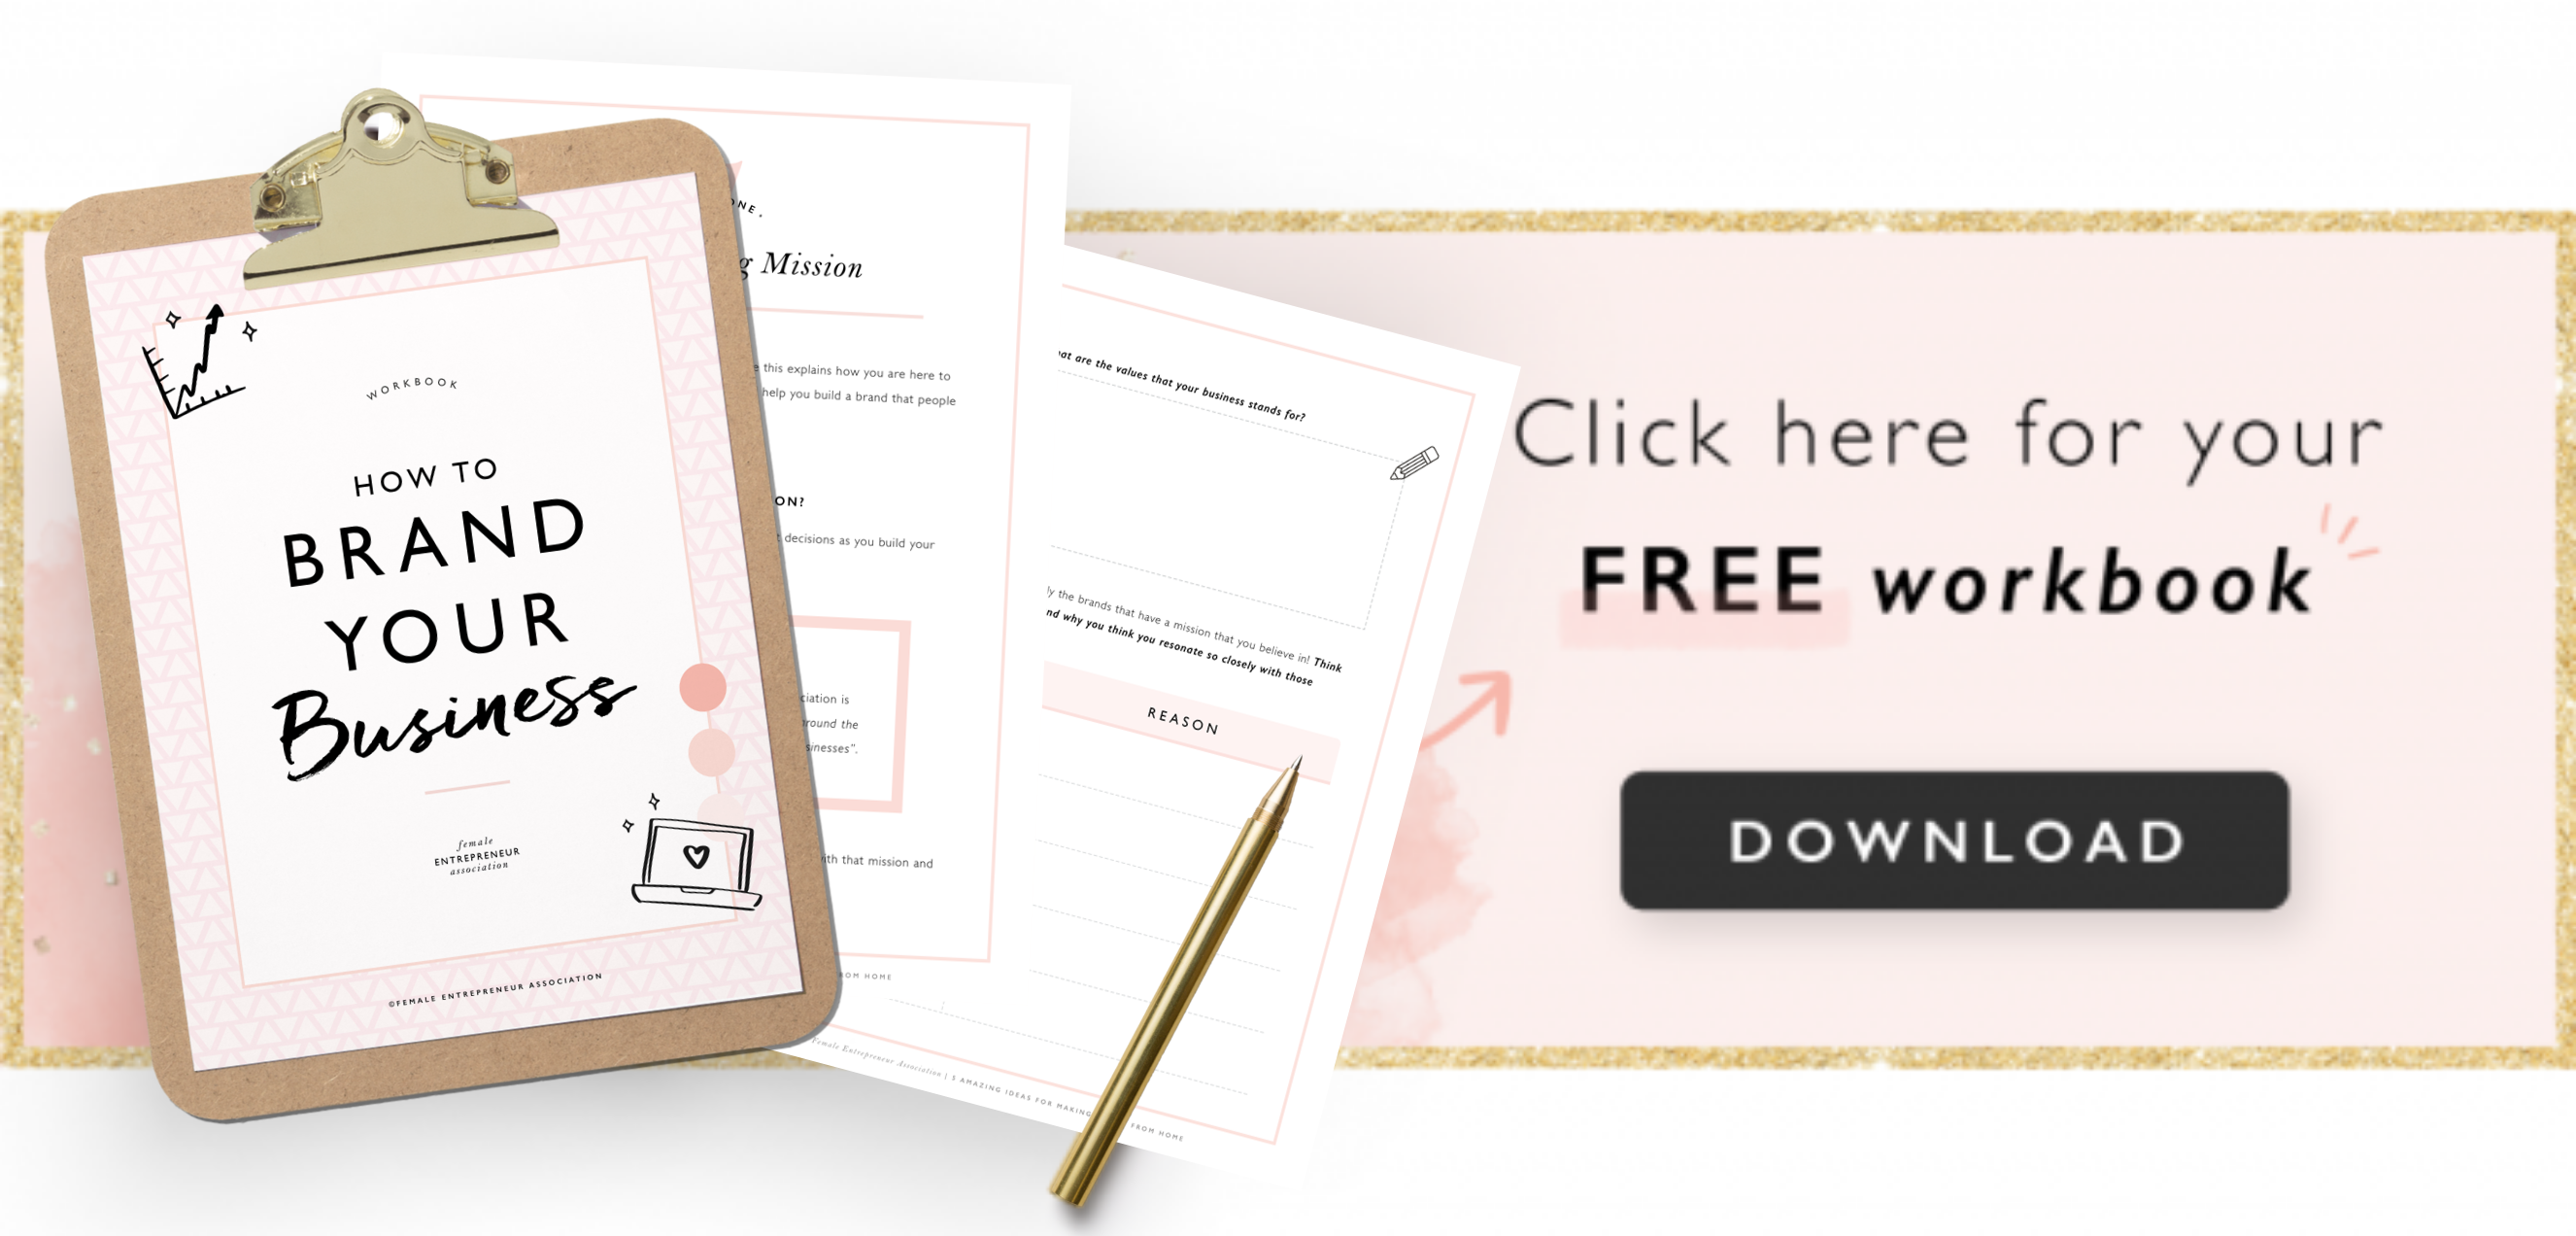 Download your free workbook